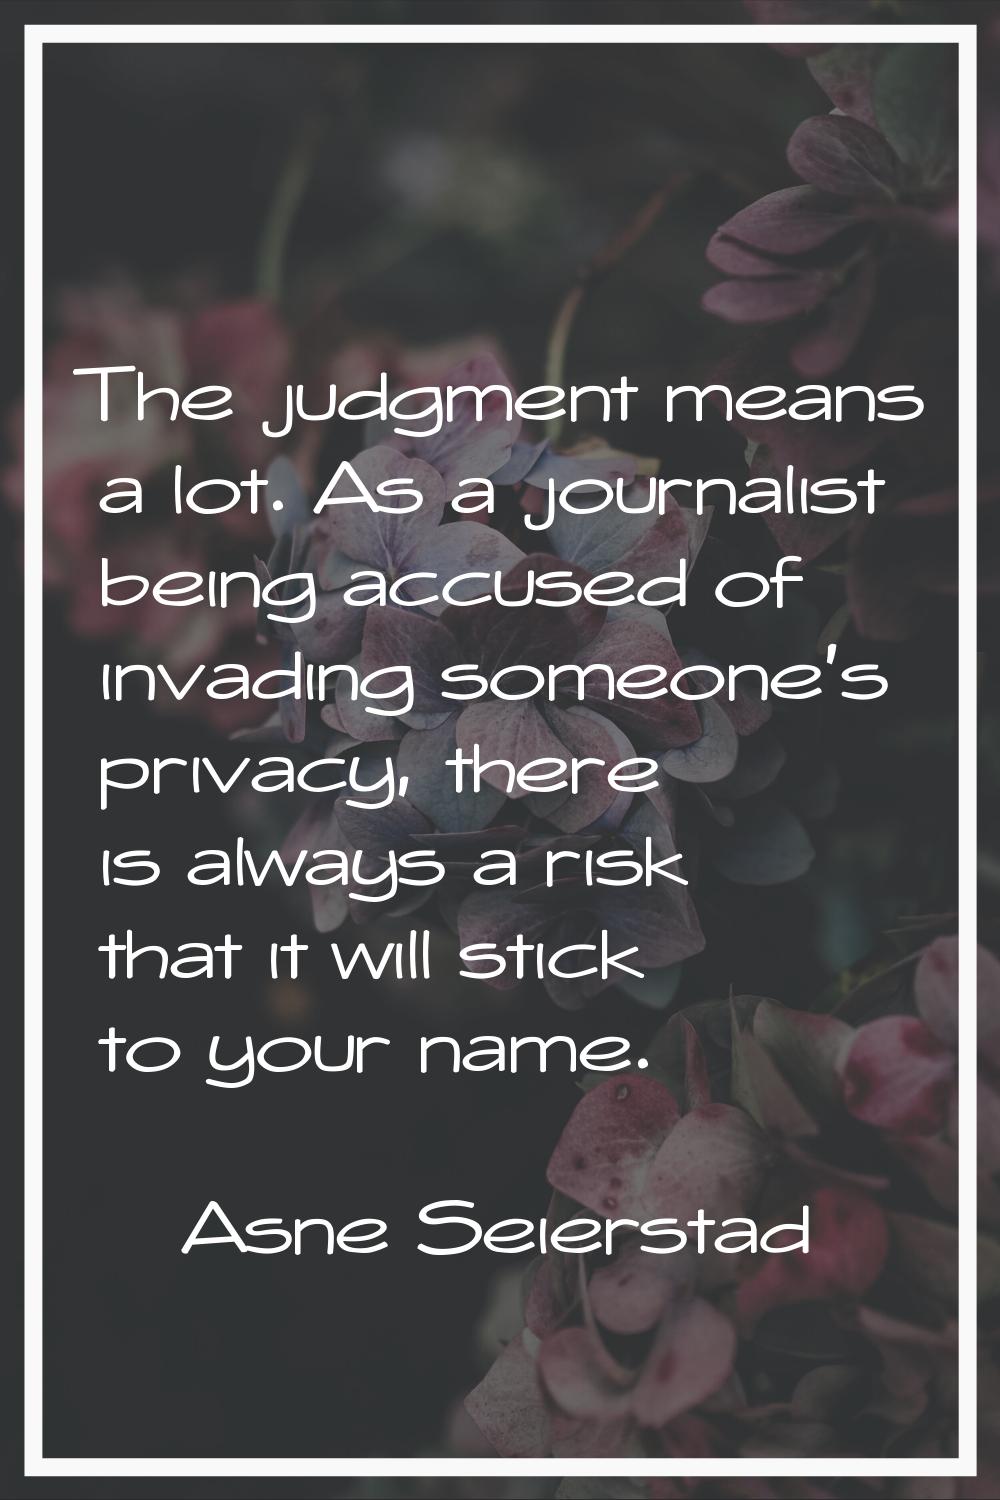 The judgment means a lot. As a journalist being accused of invading someone's privacy, there is alw